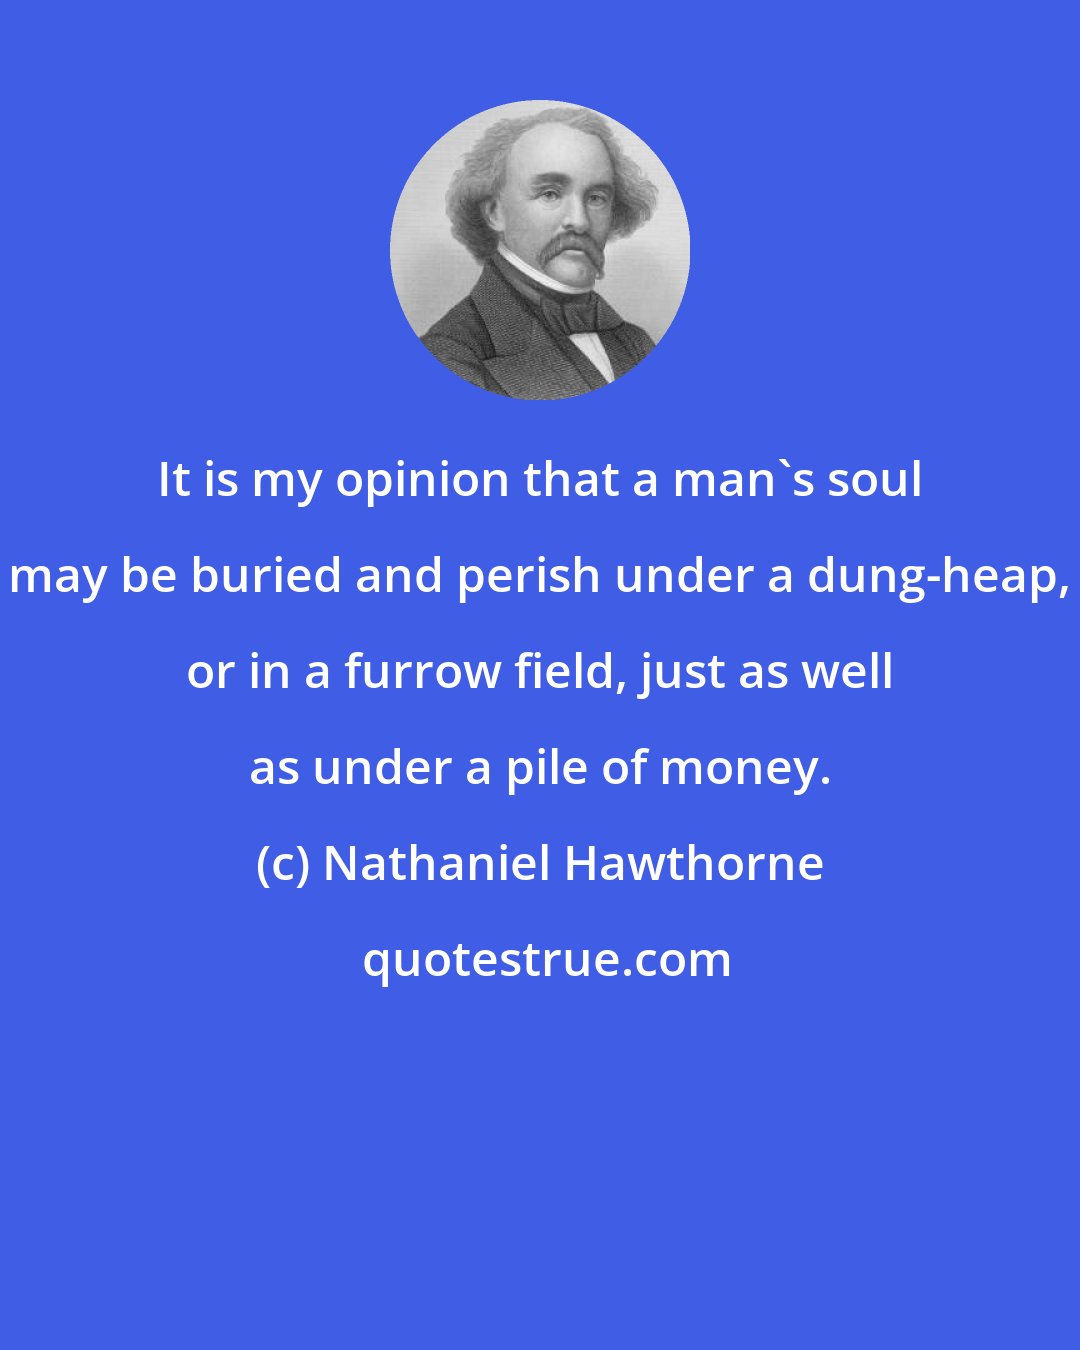 Nathaniel Hawthorne: It is my opinion that a man's soul may be buried and perish under a dung-heap, or in a furrow field, just as well as under a pile of money.